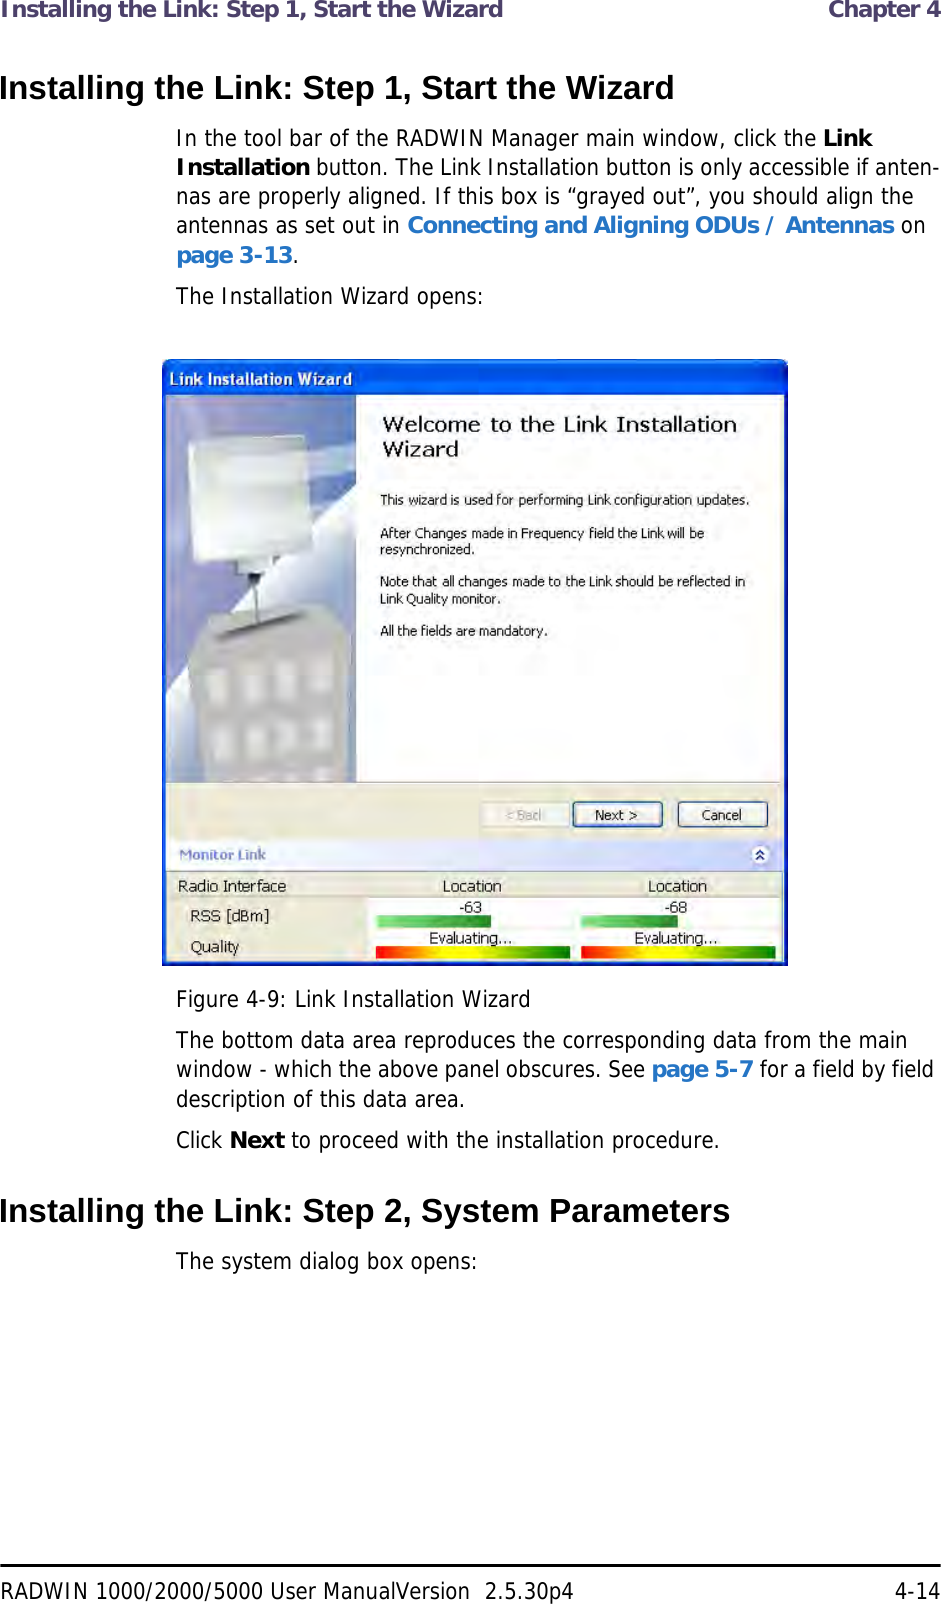 Installing the Link: Step 1, Start the Wizard  Chapter 4RADWIN 1000/2000/5000 User ManualVersion  2.5.30p4 4-14Installing the Link: Step 1, Start the WizardIn the tool bar of the RADWIN Manager main window, click the Link Installation button. The Link Installation button is only accessible if anten-nas are properly aligned. If this box is “grayed out”, you should align the antennas as set out in Connecting and Aligning ODUs / Antennas on page 3-13.The Installation Wizard opens:Figure 4-9: Link Installation WizardThe bottom data area reproduces the corresponding data from the main window - which the above panel obscures. See page 5-7 for a field by field description of this data area.Click Next to proceed with the installation procedure.Installing the Link: Step 2, System ParametersThe system dialog box opens: